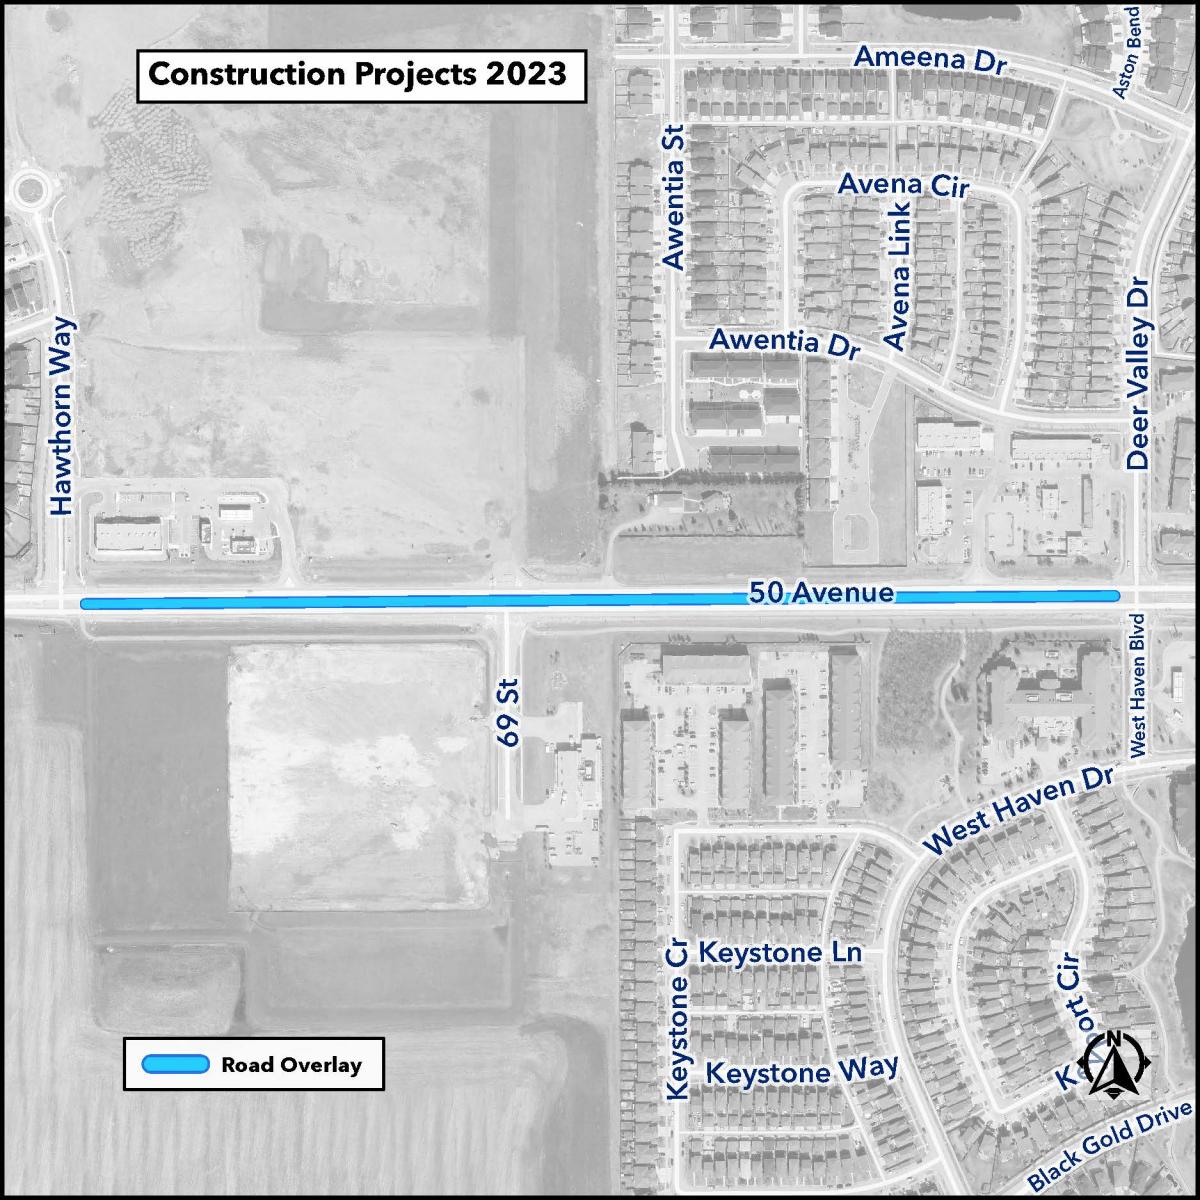 Capital Projects 2023 Postcard Map Series_50 Ave overlay.jpg